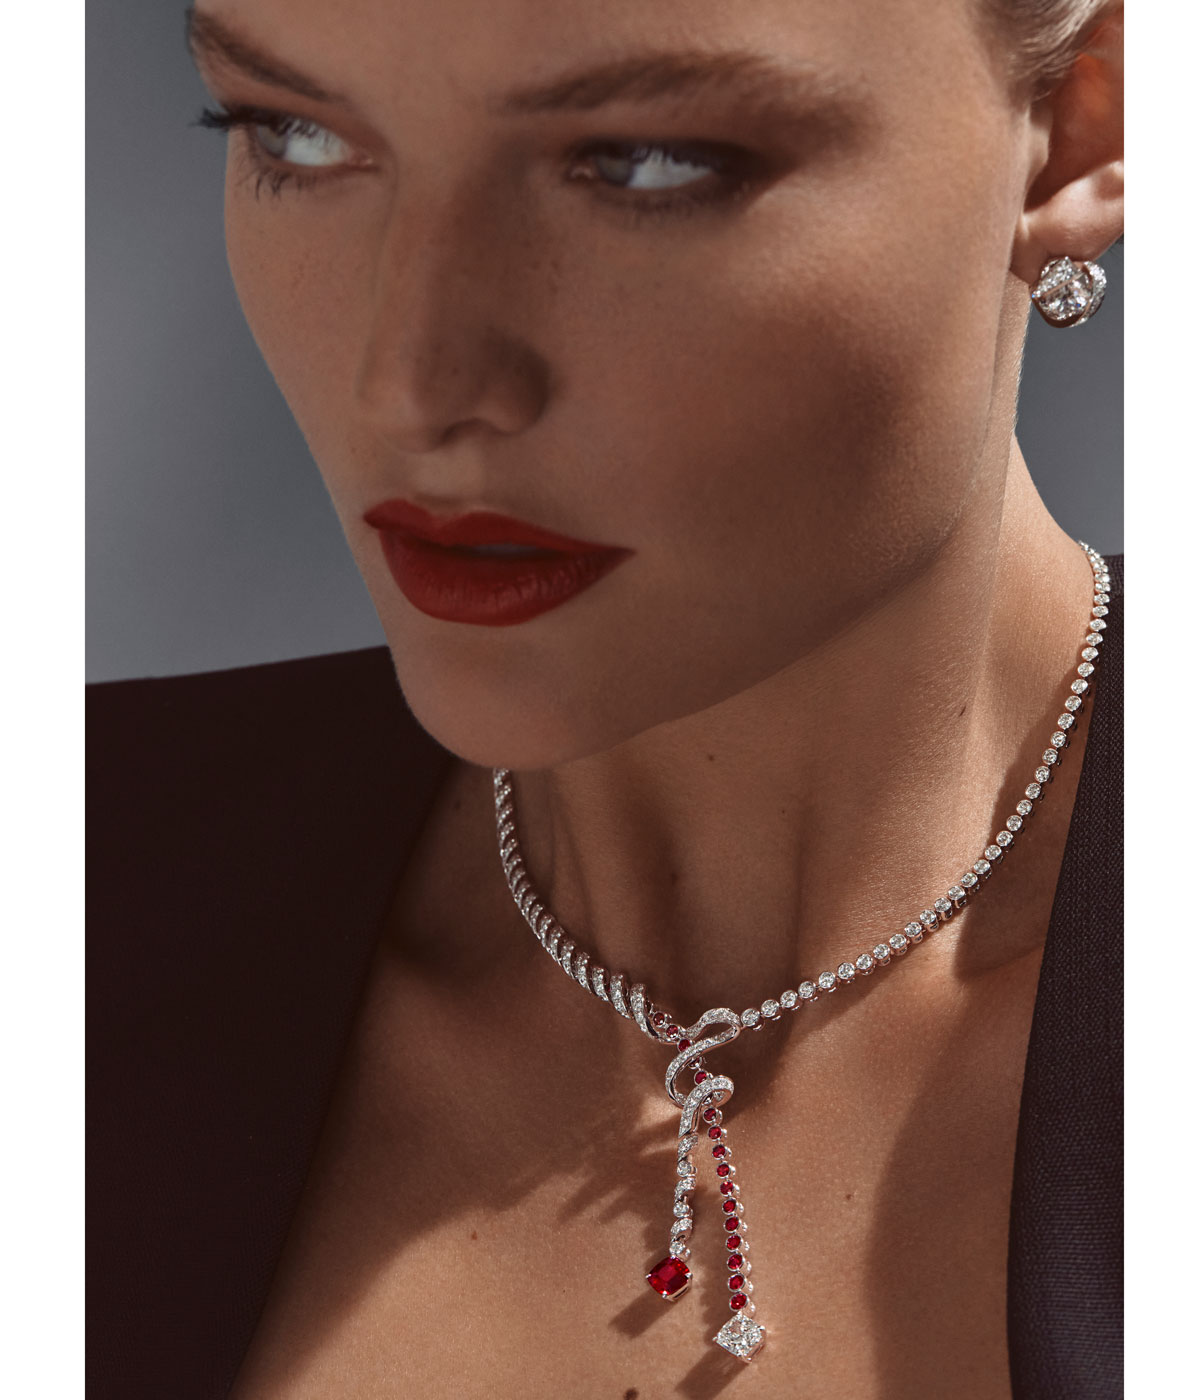 Woman wearing diamond earrings and a diamond and ruby necklace